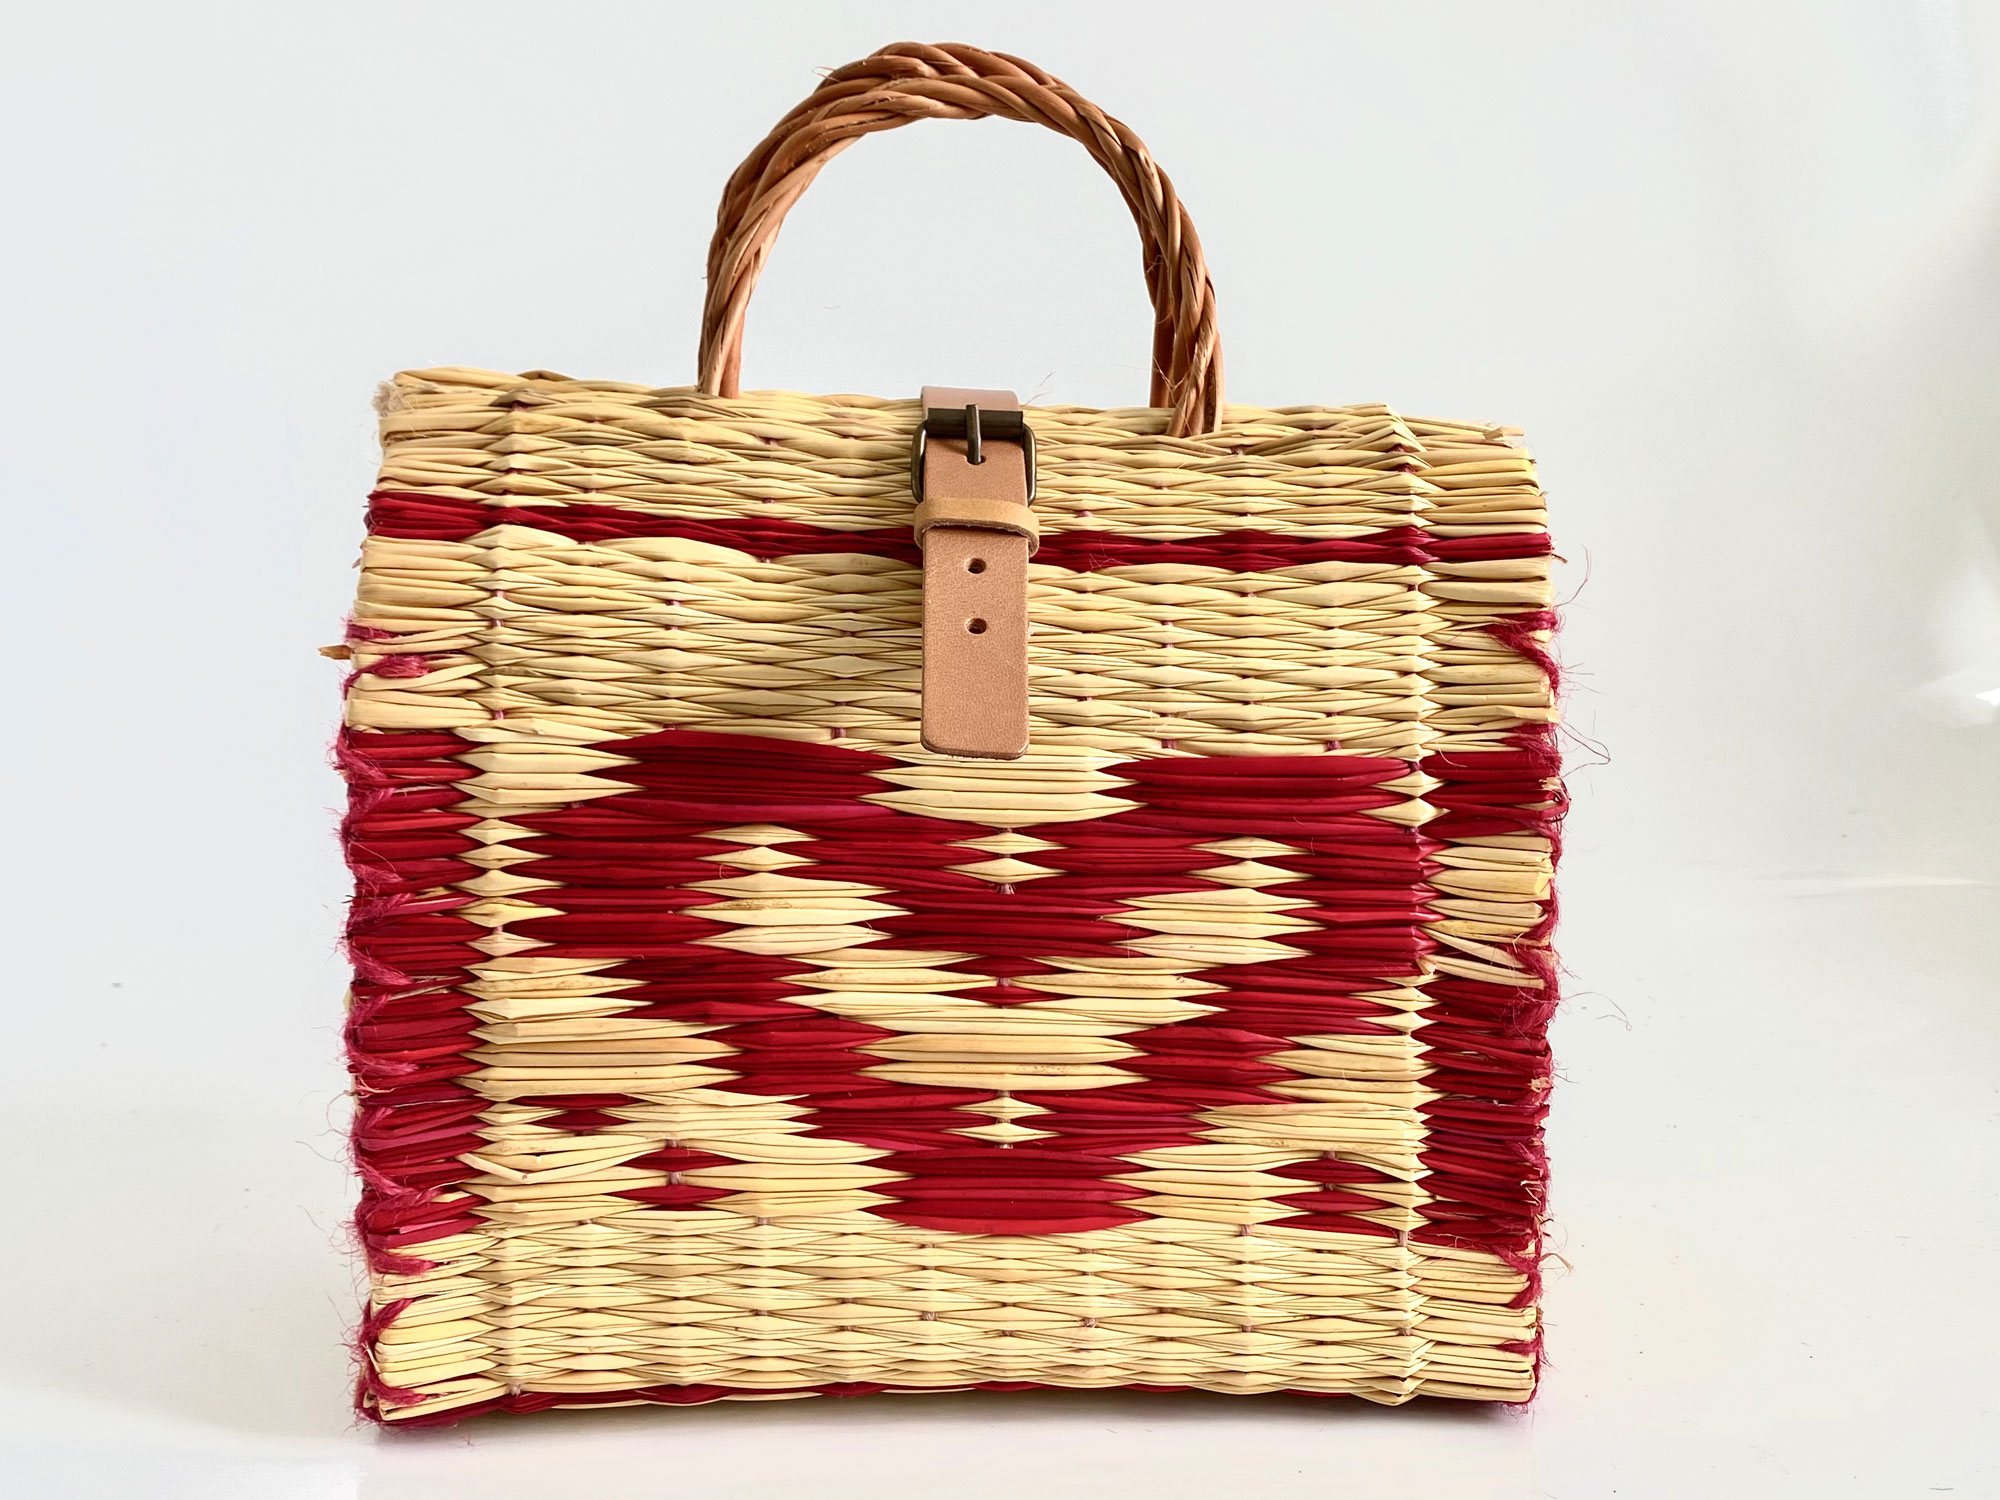 Portuguese Reed Basket - Red Heart Zêzere